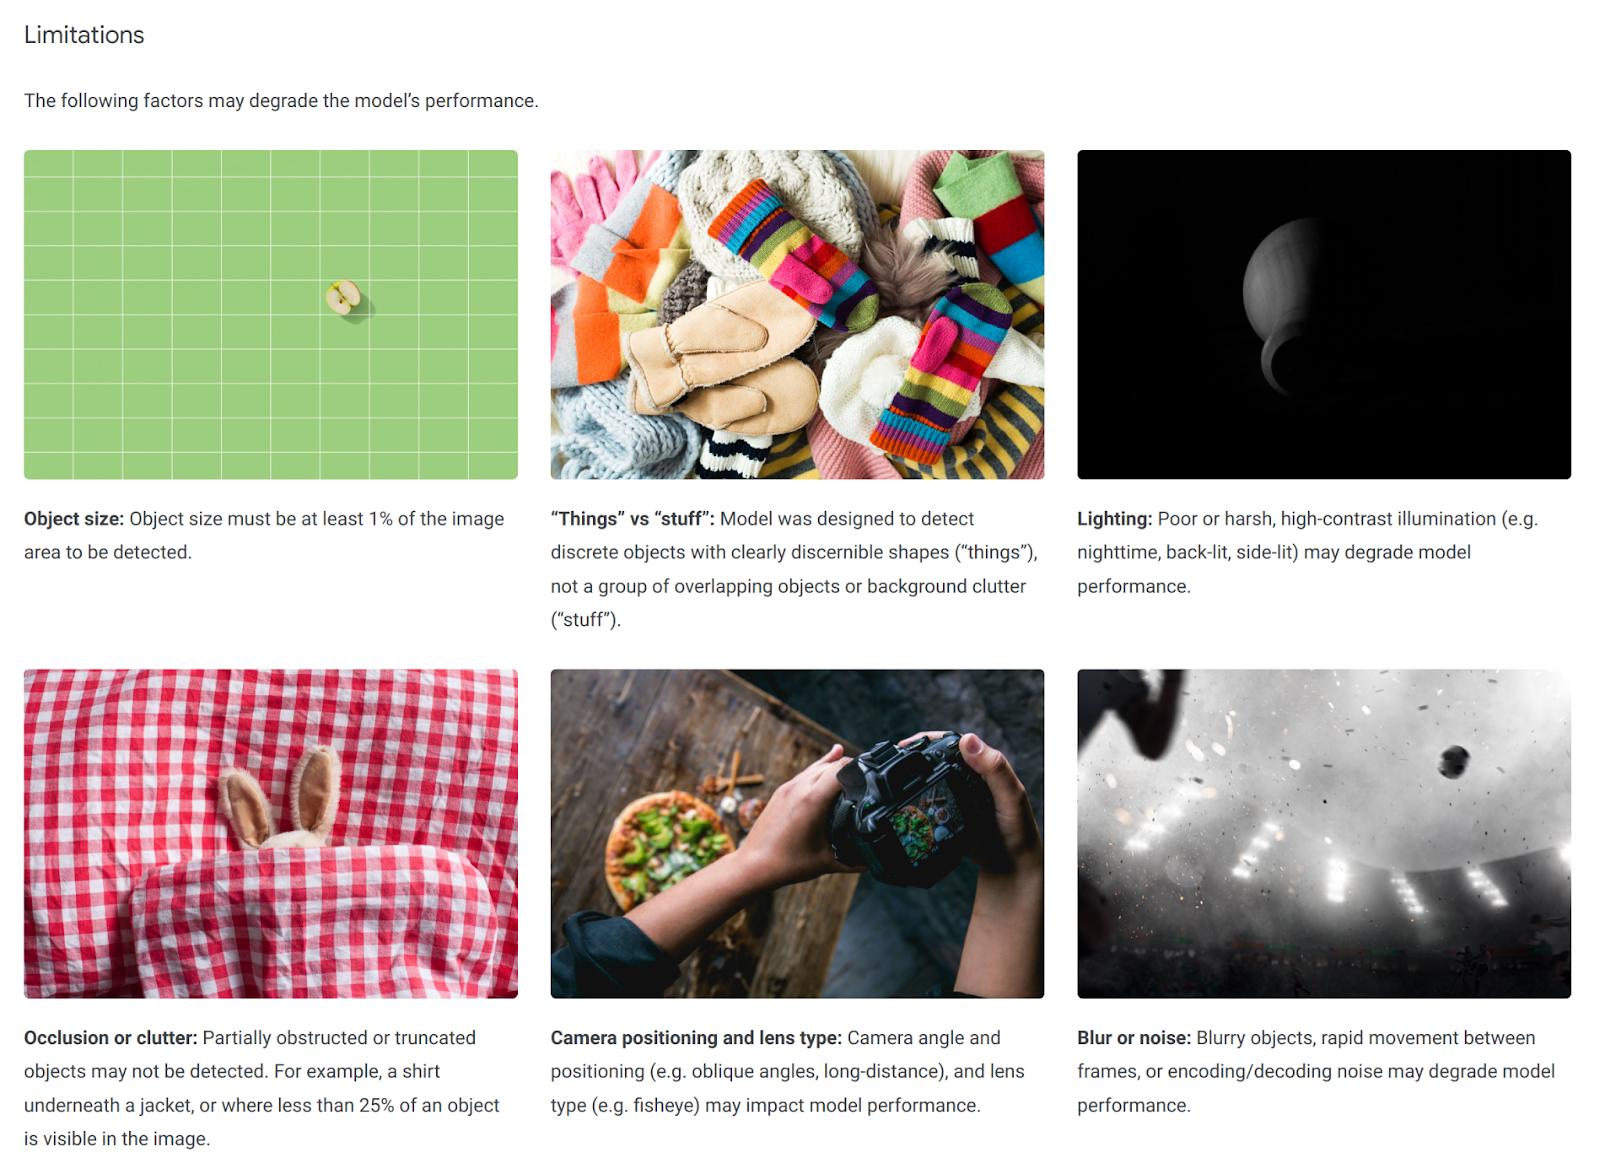 A screenshot of a website with 6 images each labeled with a corresponding text. For example one image shows a tiny object and is labeled with text explaining that the model is intended for objects that must be at least 1% of the image. The other 5 images illustrate similar limitations of the model regarding concreteness, lighting, occlusion, camera positioning, and blur.